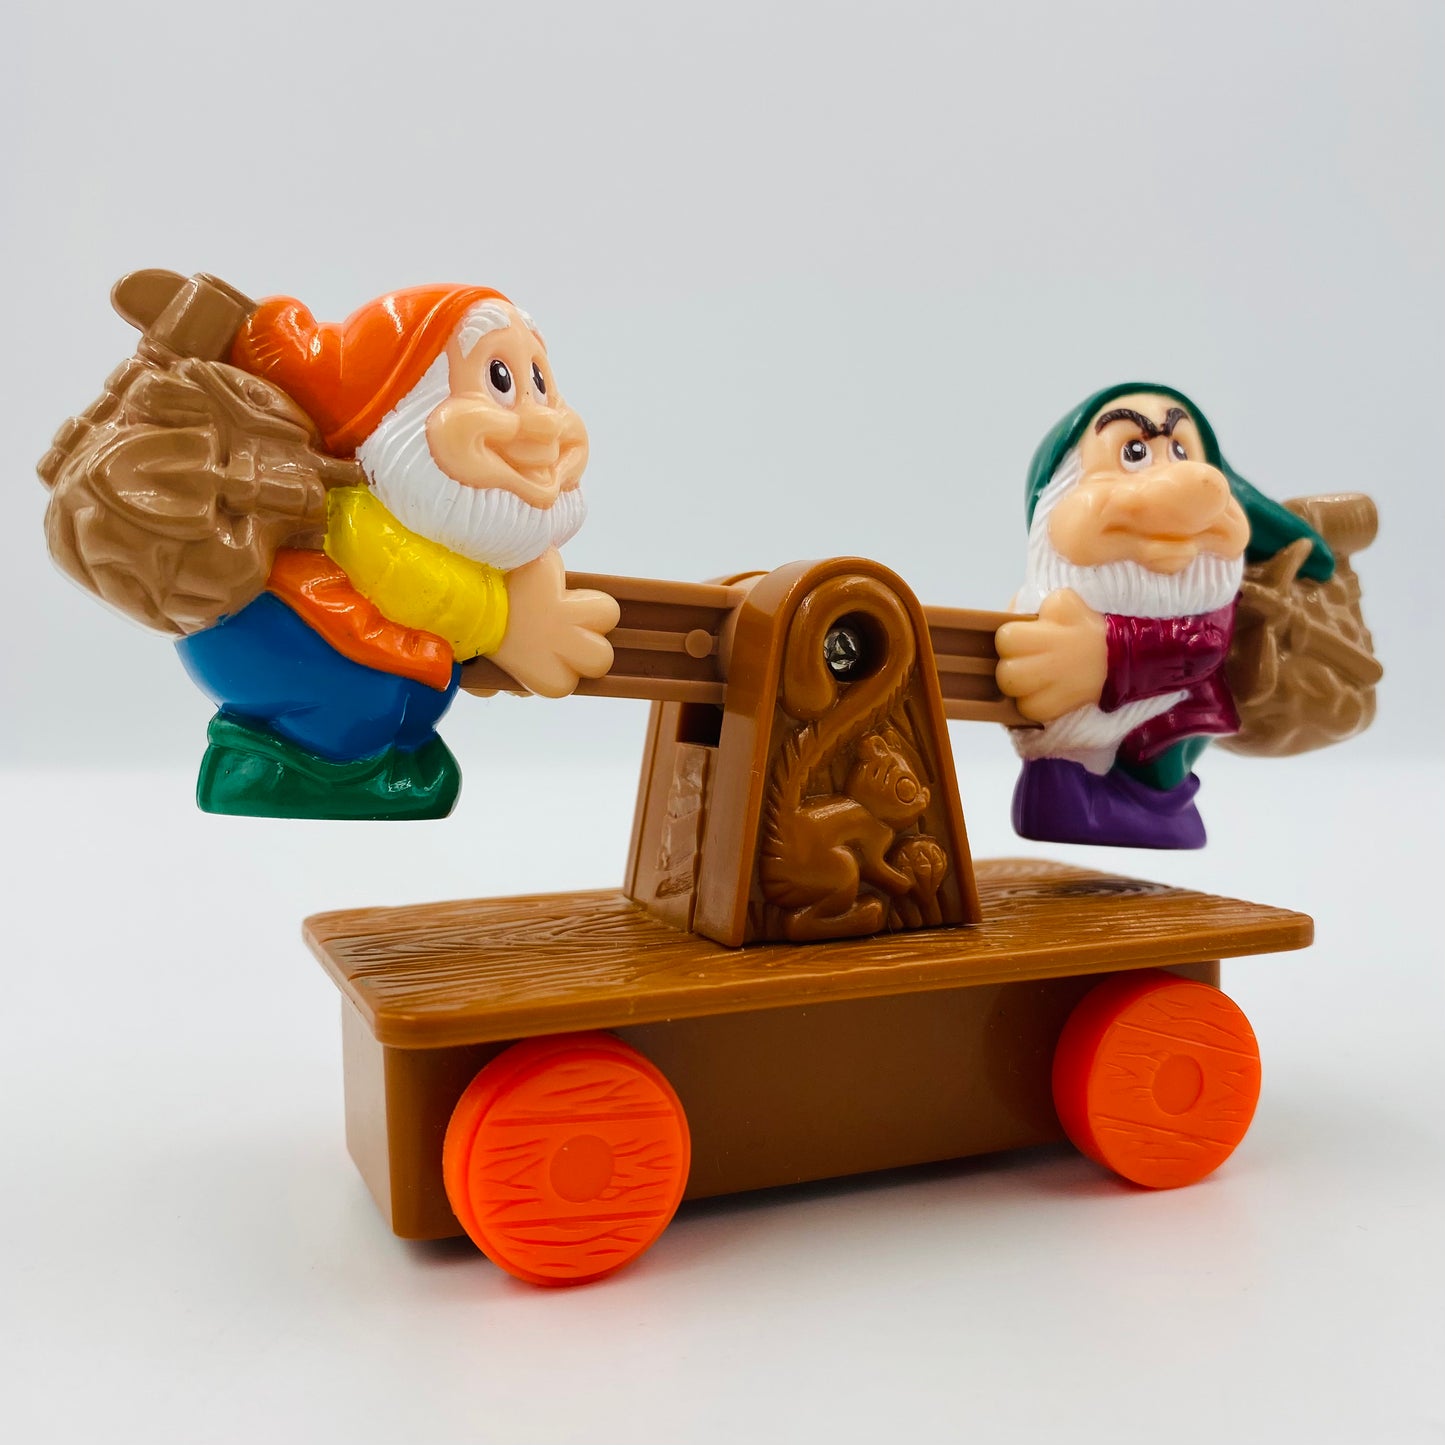 Snow White and the Seven Dwarfs set McDonald's Happy Meal toy (1992) loose